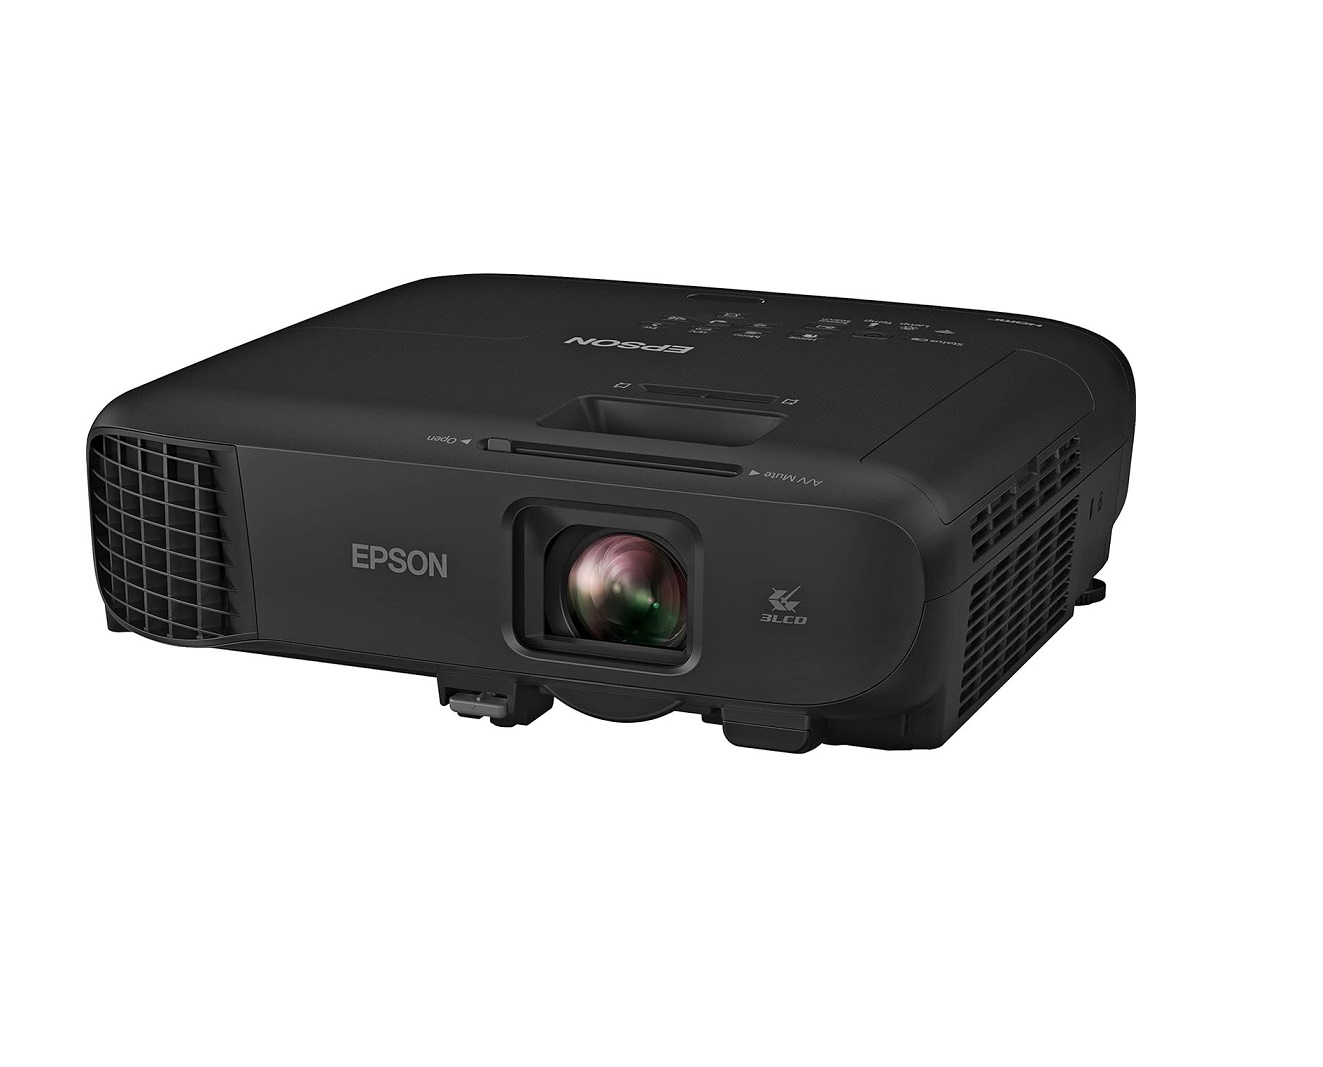 Epson Powerlite 1288 4000-Lumen Full Hd 3LCD Projector With Wi-Fi V11H978120